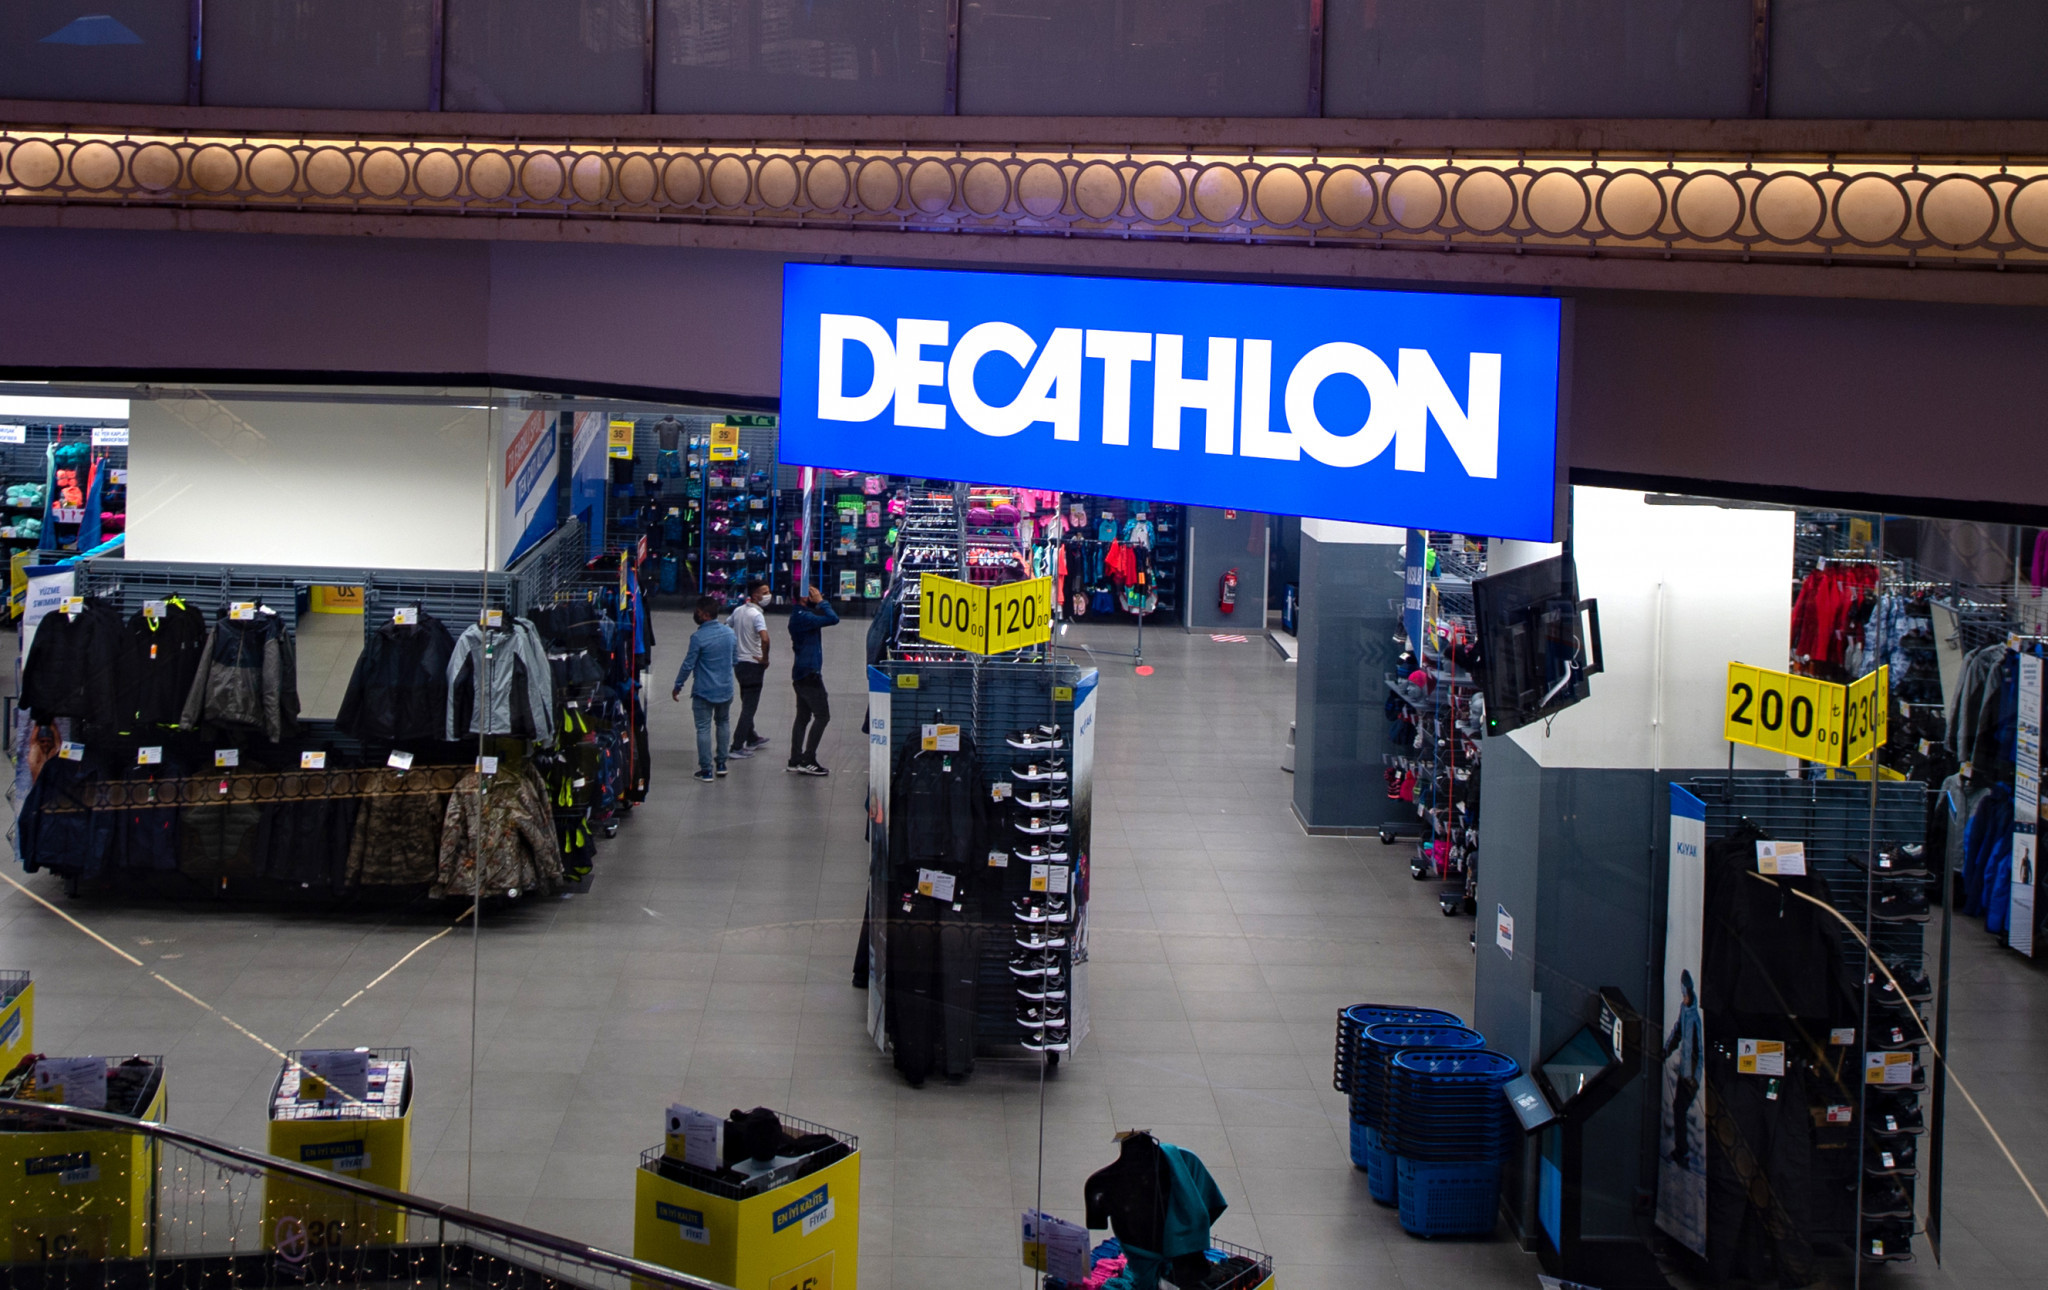 Decathlon has signed on as an official partner of Paris 2024 ©Getty Images